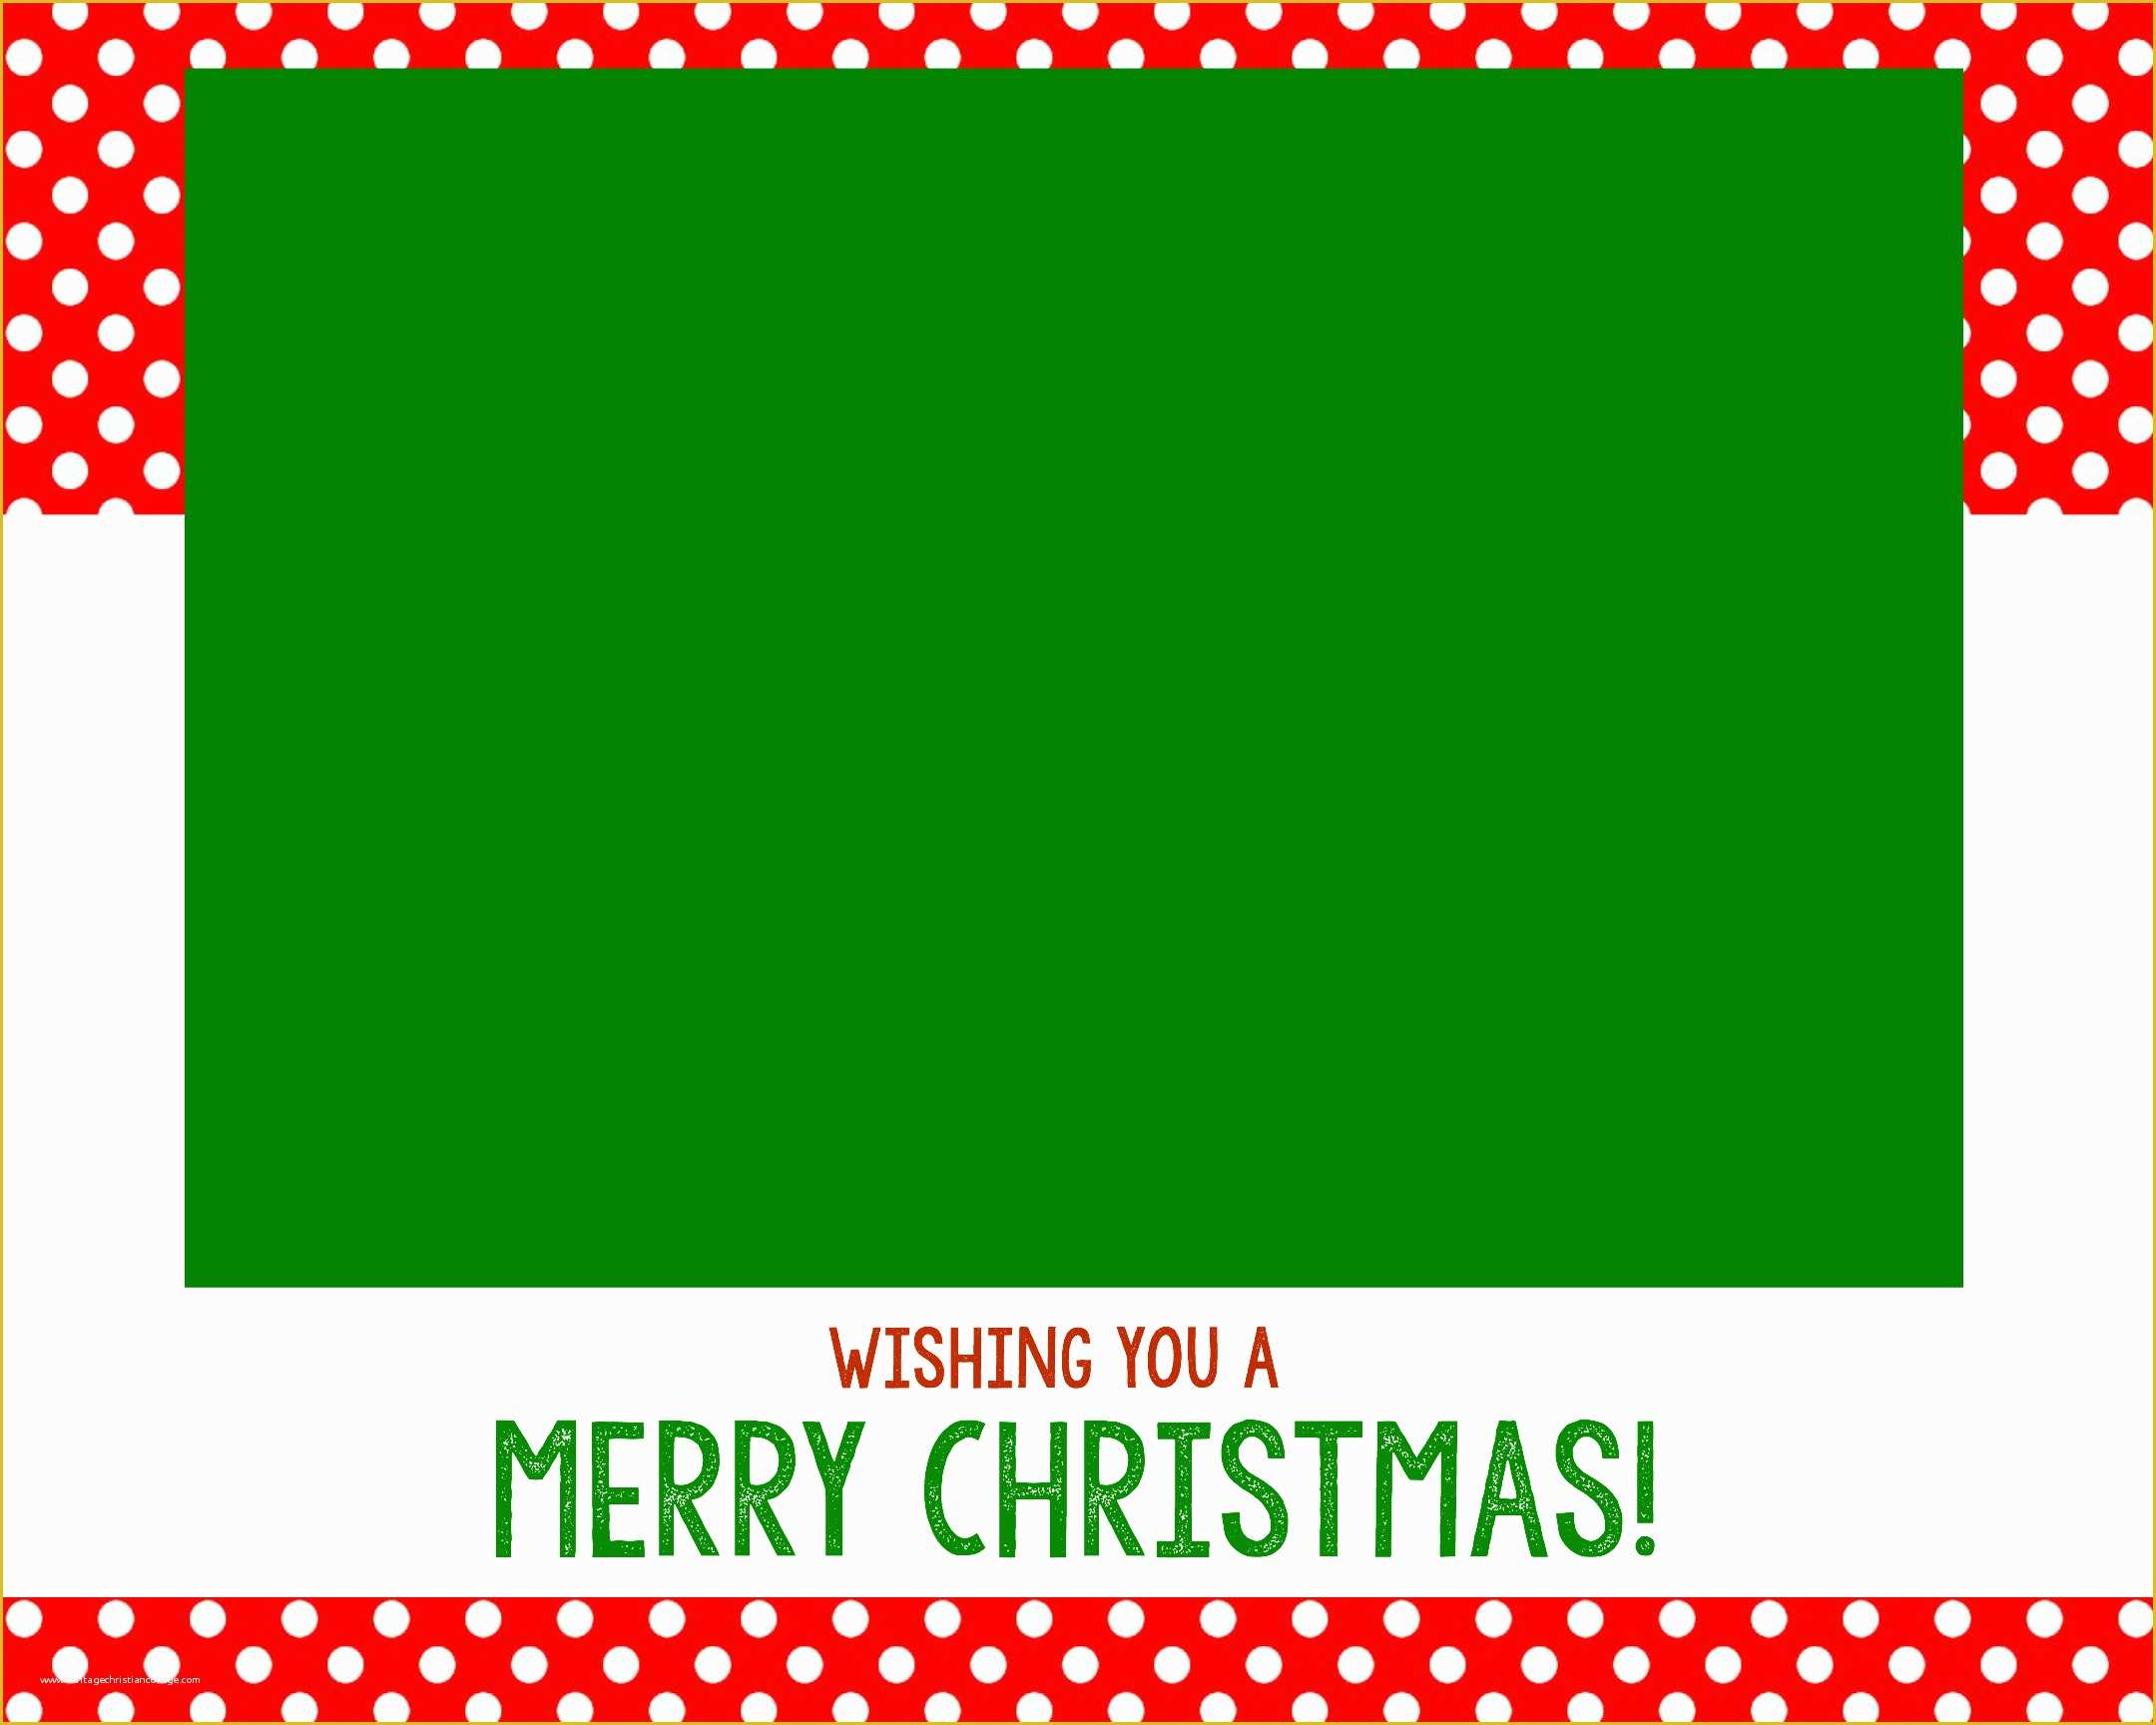 Free Printable Holiday Photo Card Templates Of Free Christmas Card Templates Crazy Little Projects